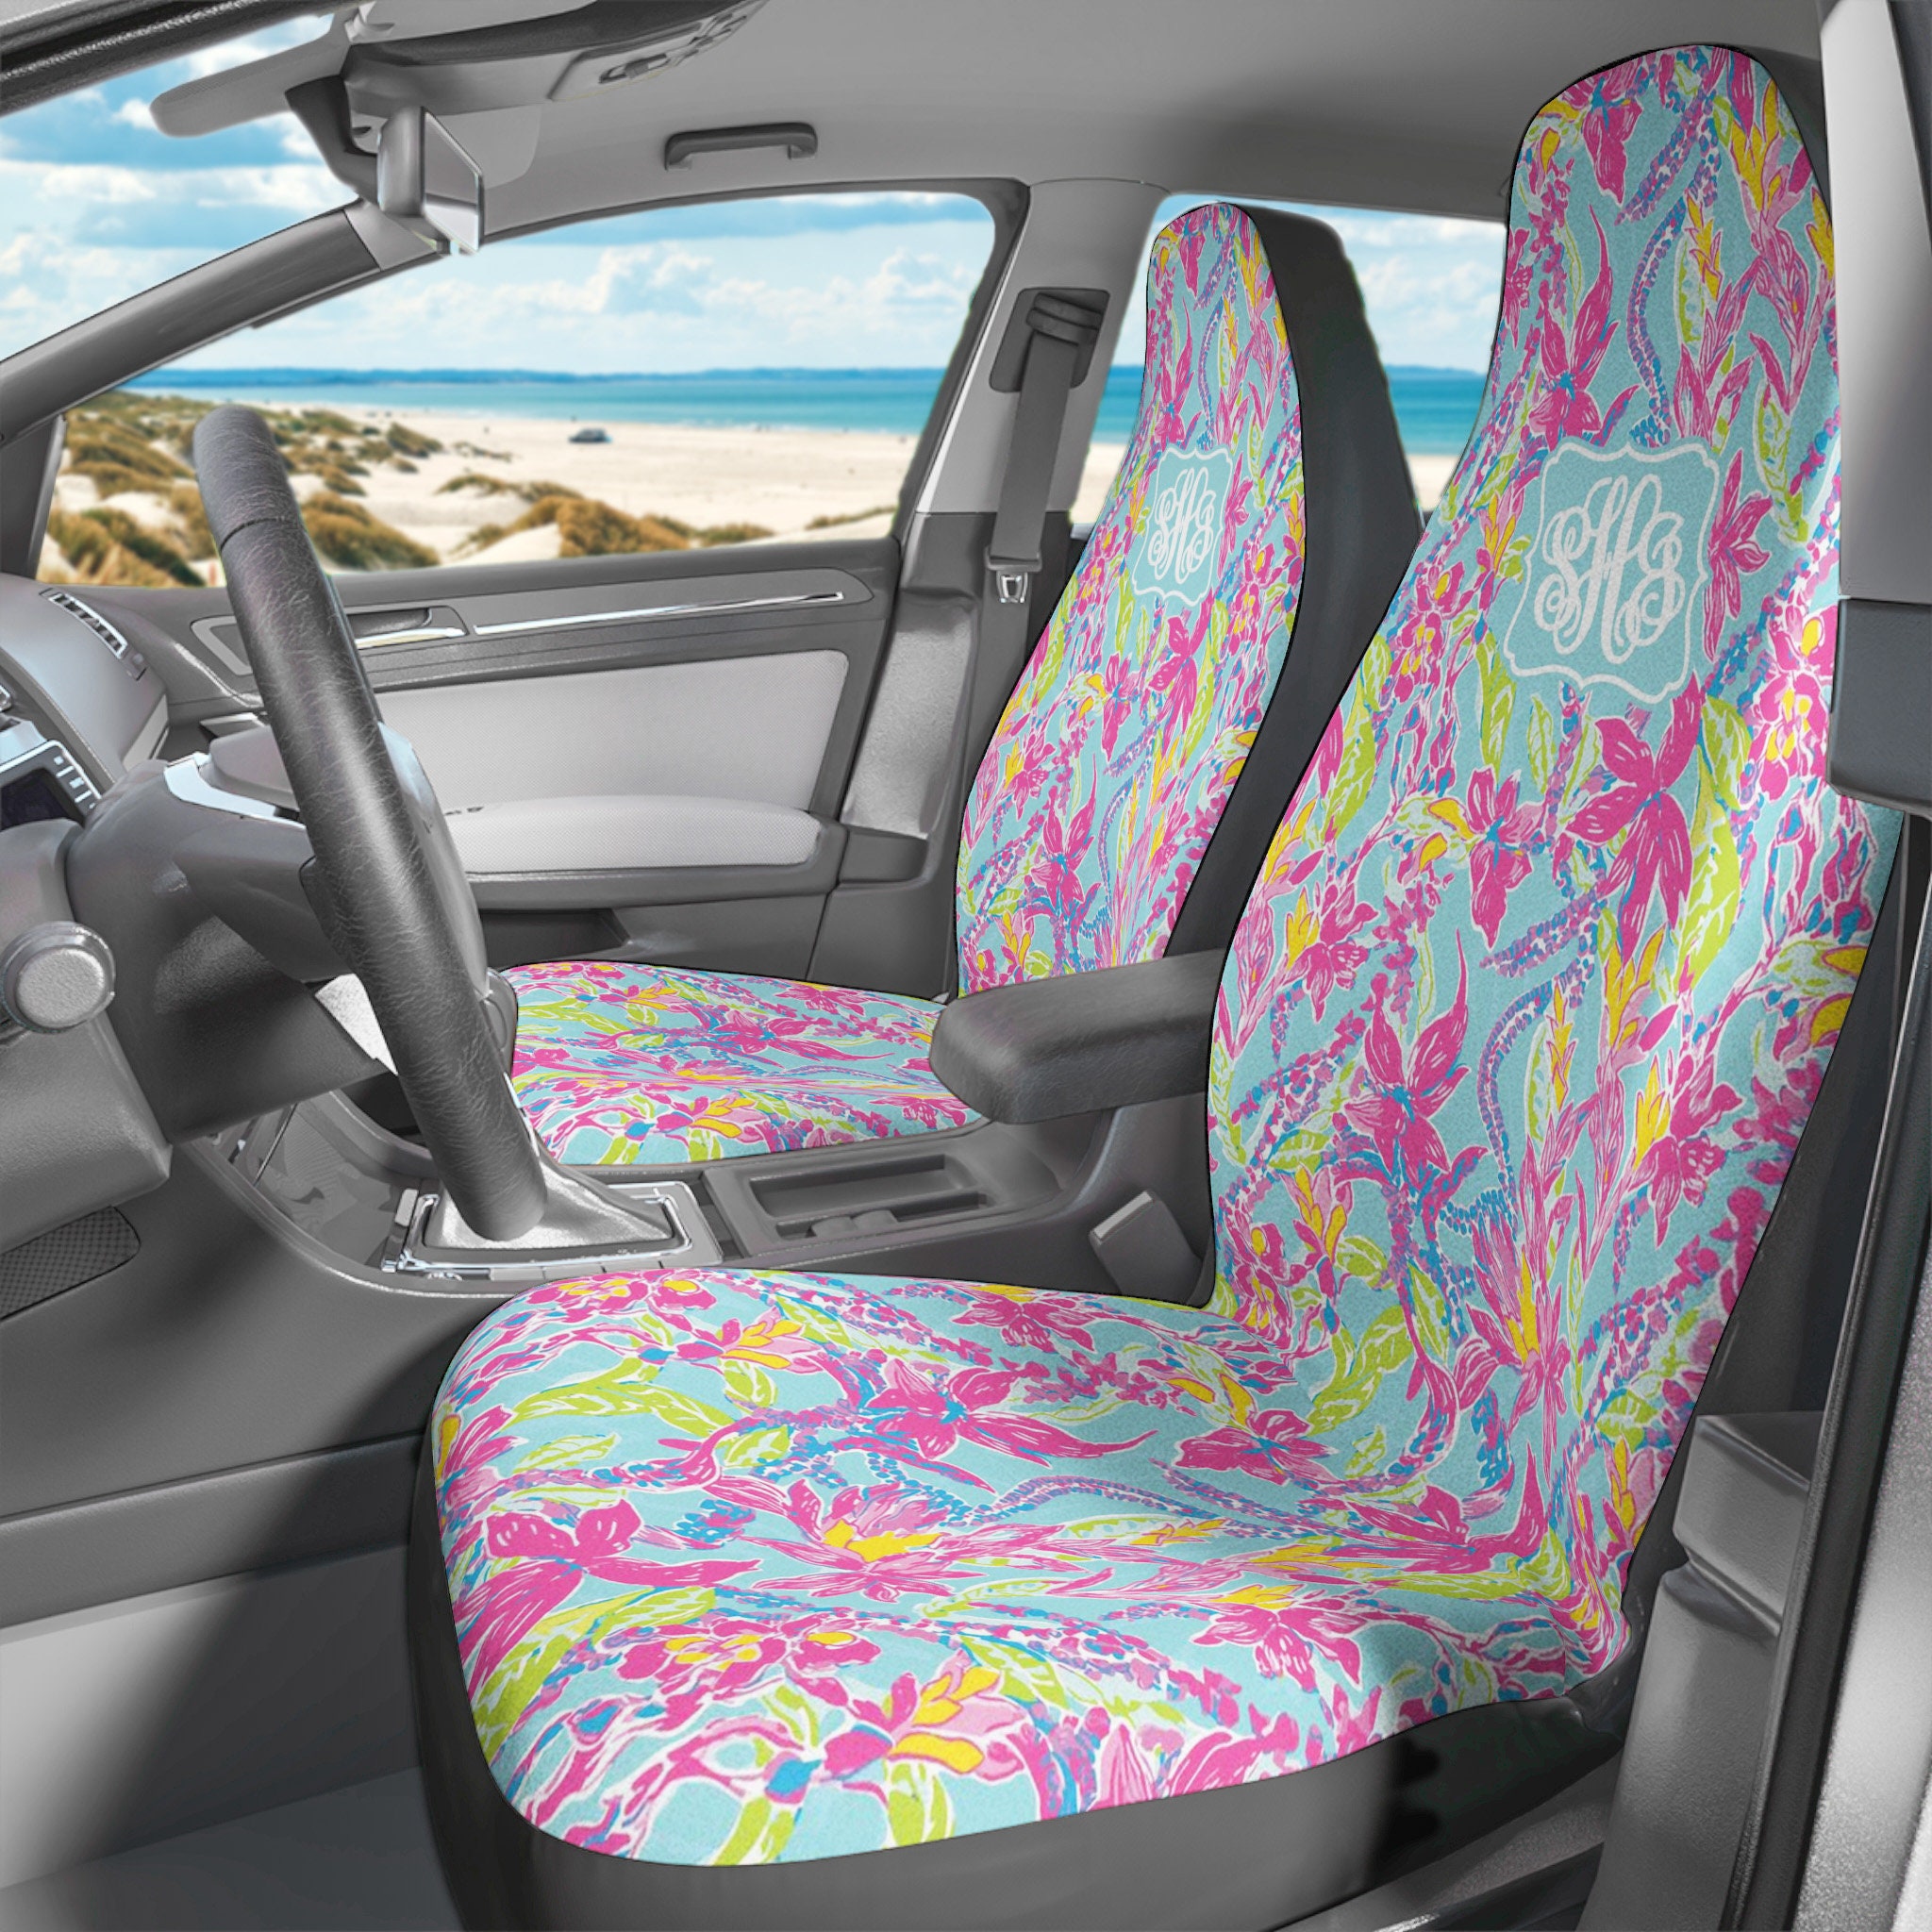 Custom Car Seat Covers - Set of Two, Design & Preview Online